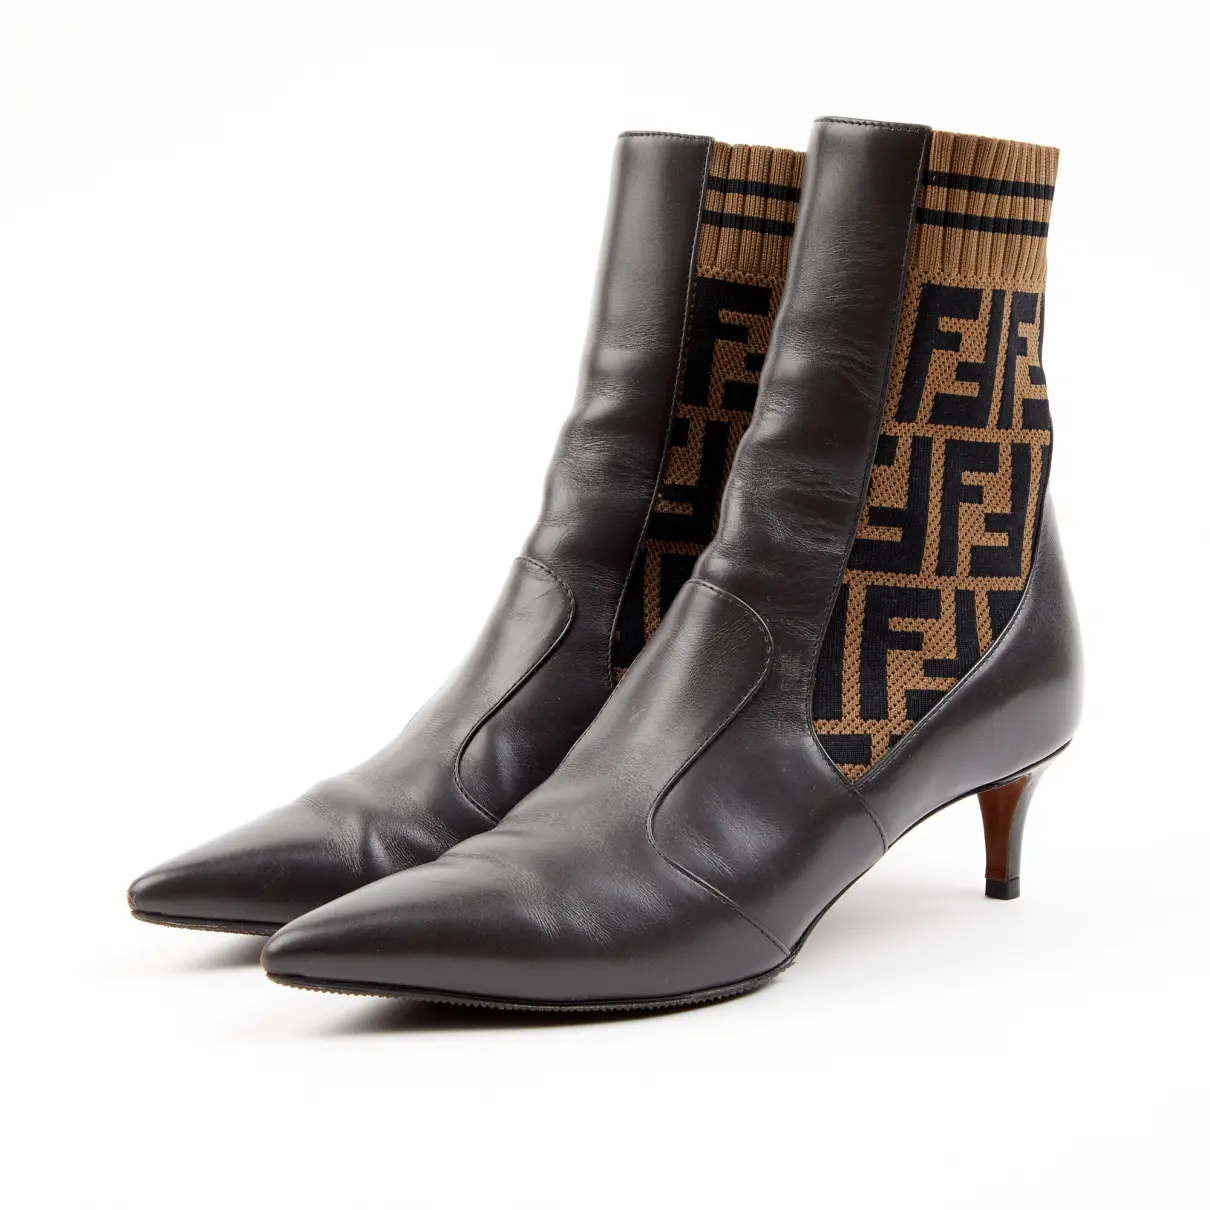 Buy Fendi Colibri leather ankle boots online